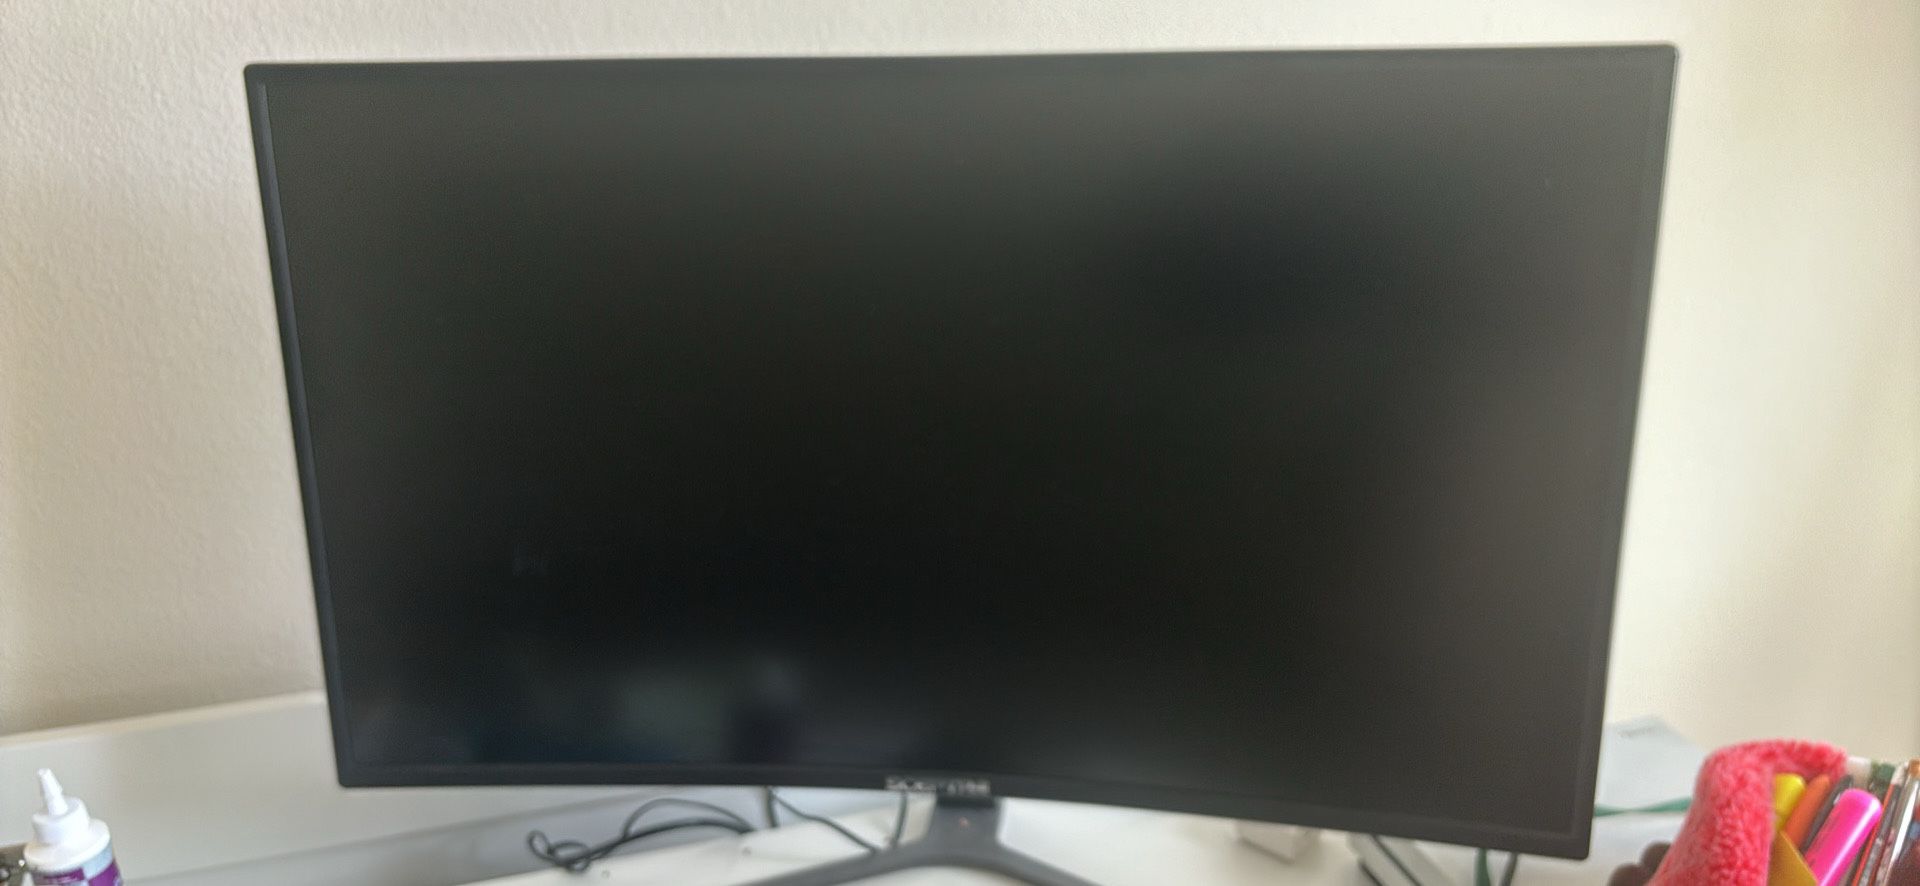 SPECTRE CURVED MONITOR NEW 32”